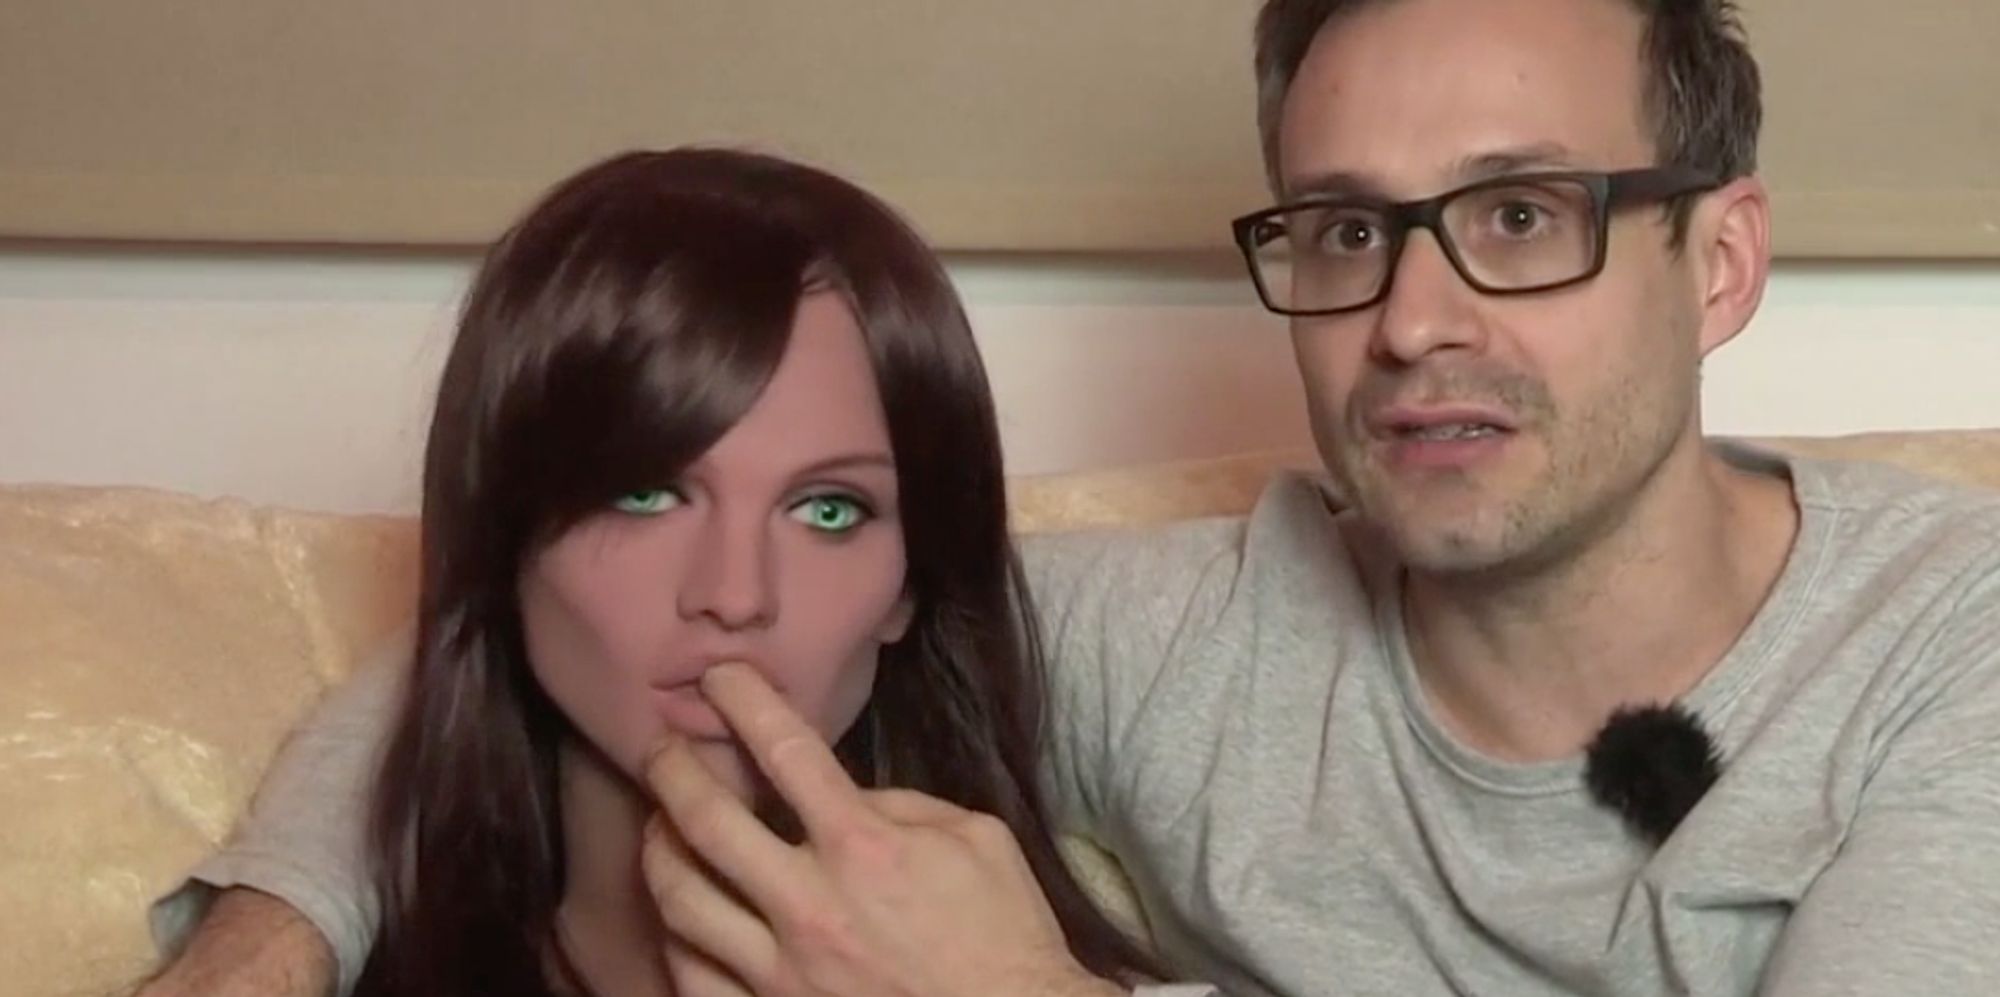 Engineer Builds Sex Doll That You Need To Charm Before Having Sex With